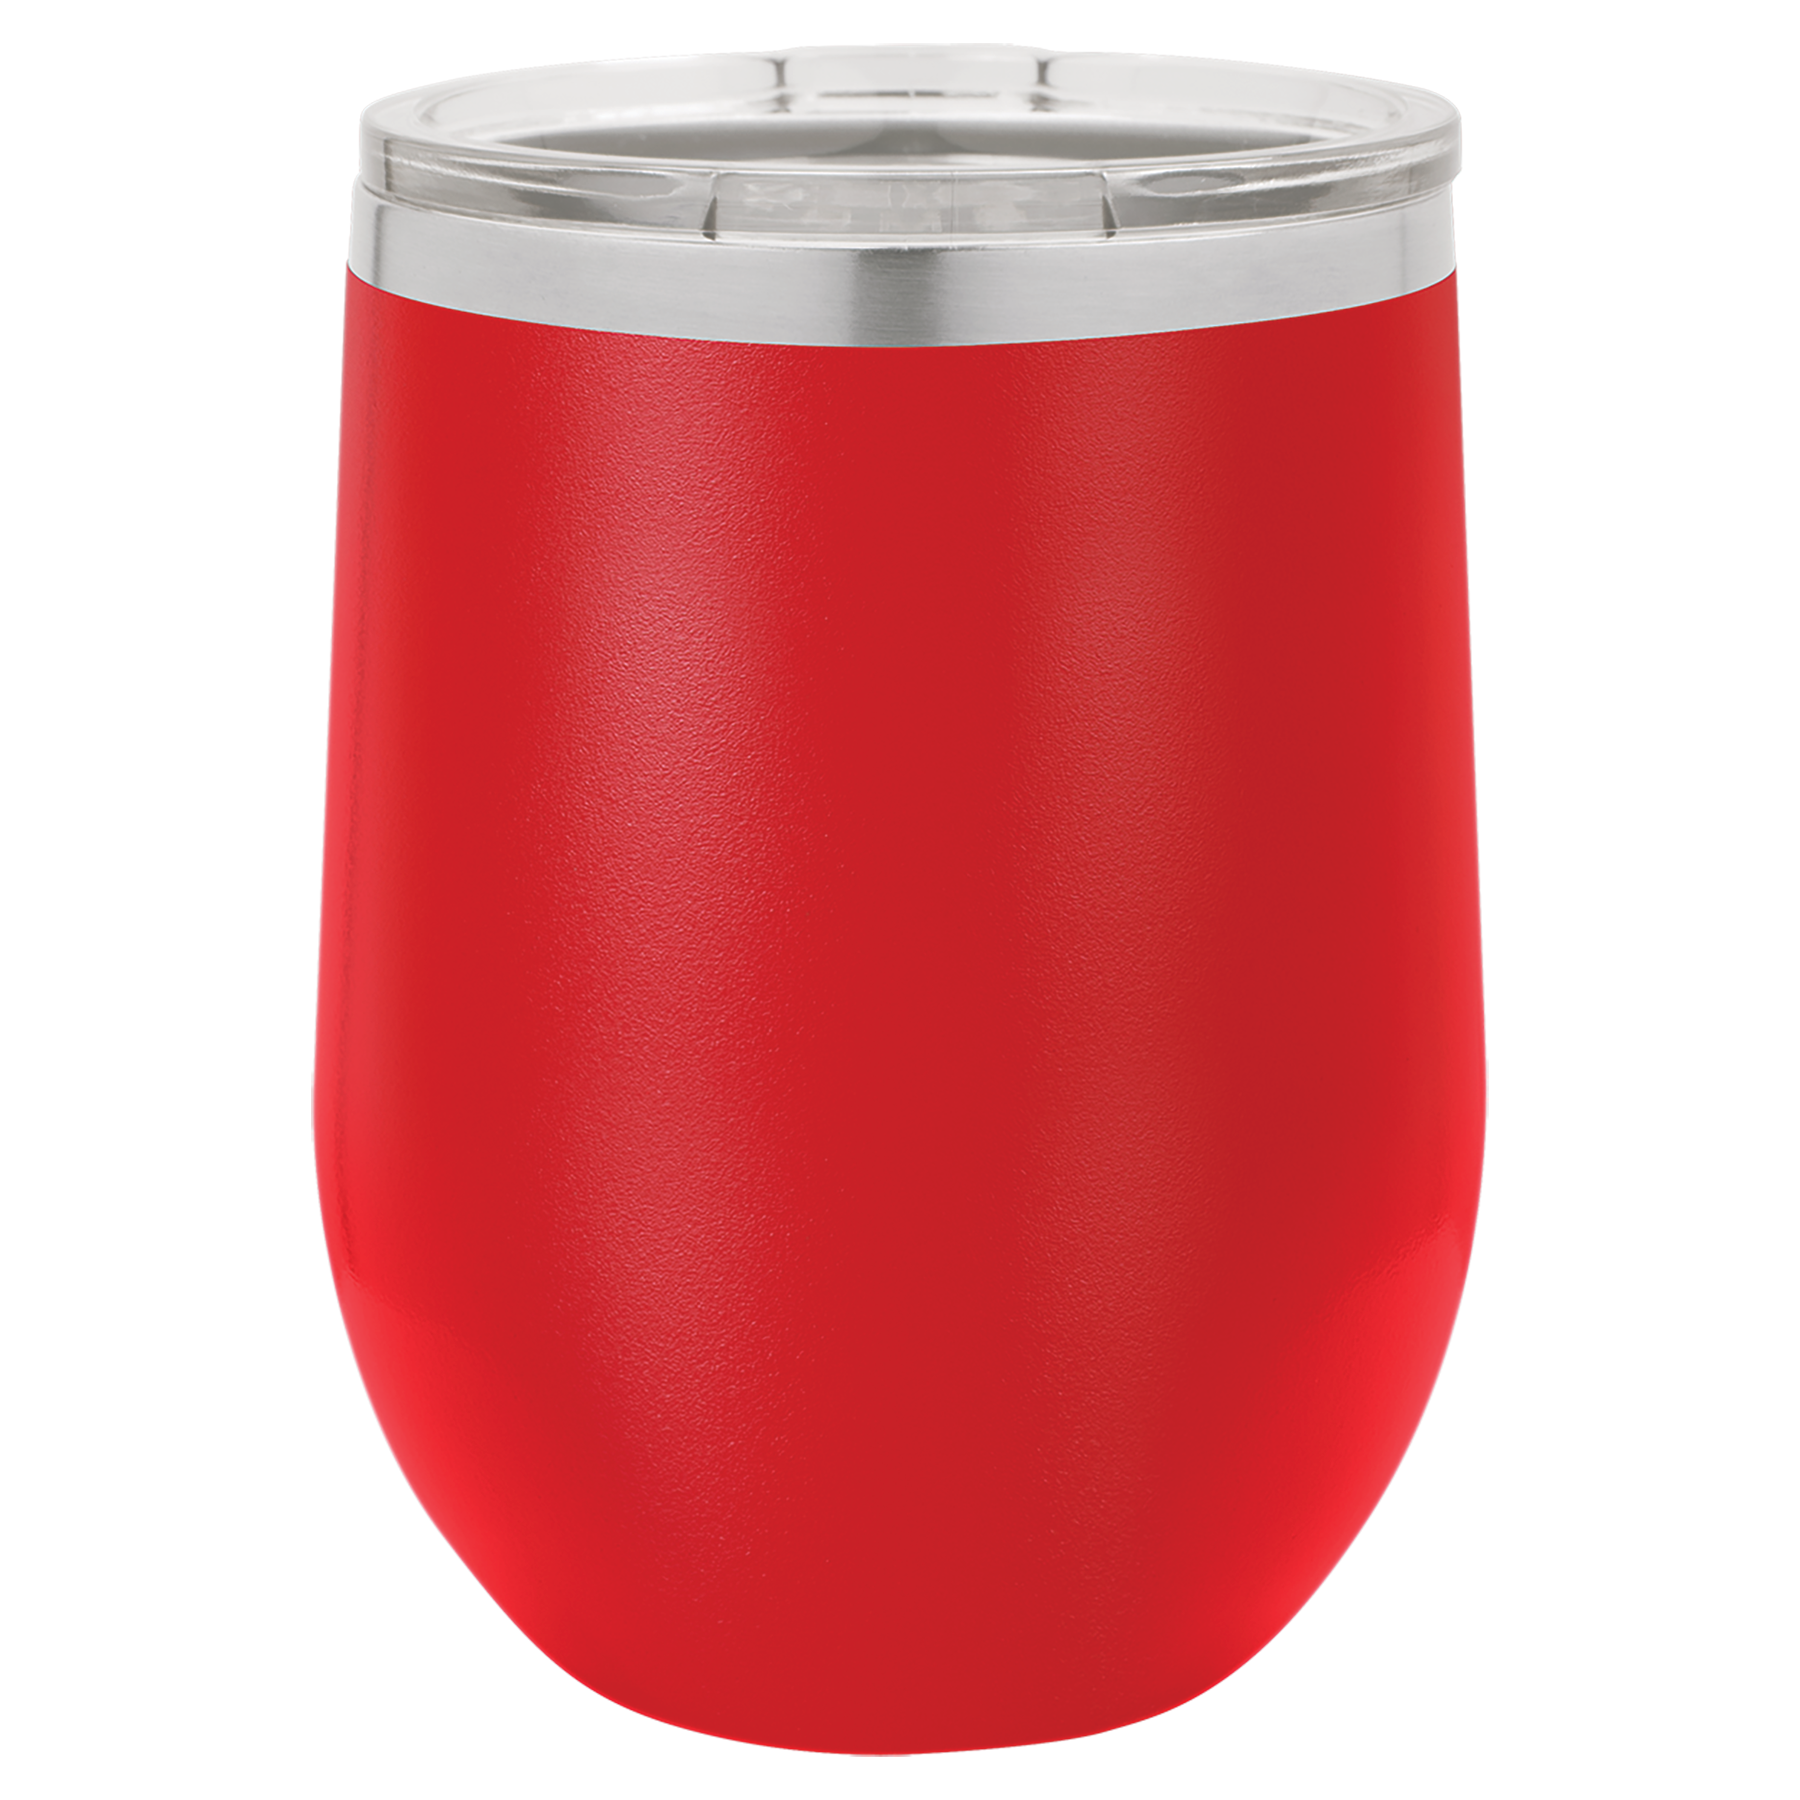 Engraved Red 12 oz. Stemless Wine Tumbler. Double-wall, vacuum insulation with a clear lid. They are 2X heat and cold resistant compared to glass or plastic wine glasses. Polar Camels are made from 18/8 gauge stainless steel (18% chromium/8% nickel) - also know as Type 304 Food Grade. 